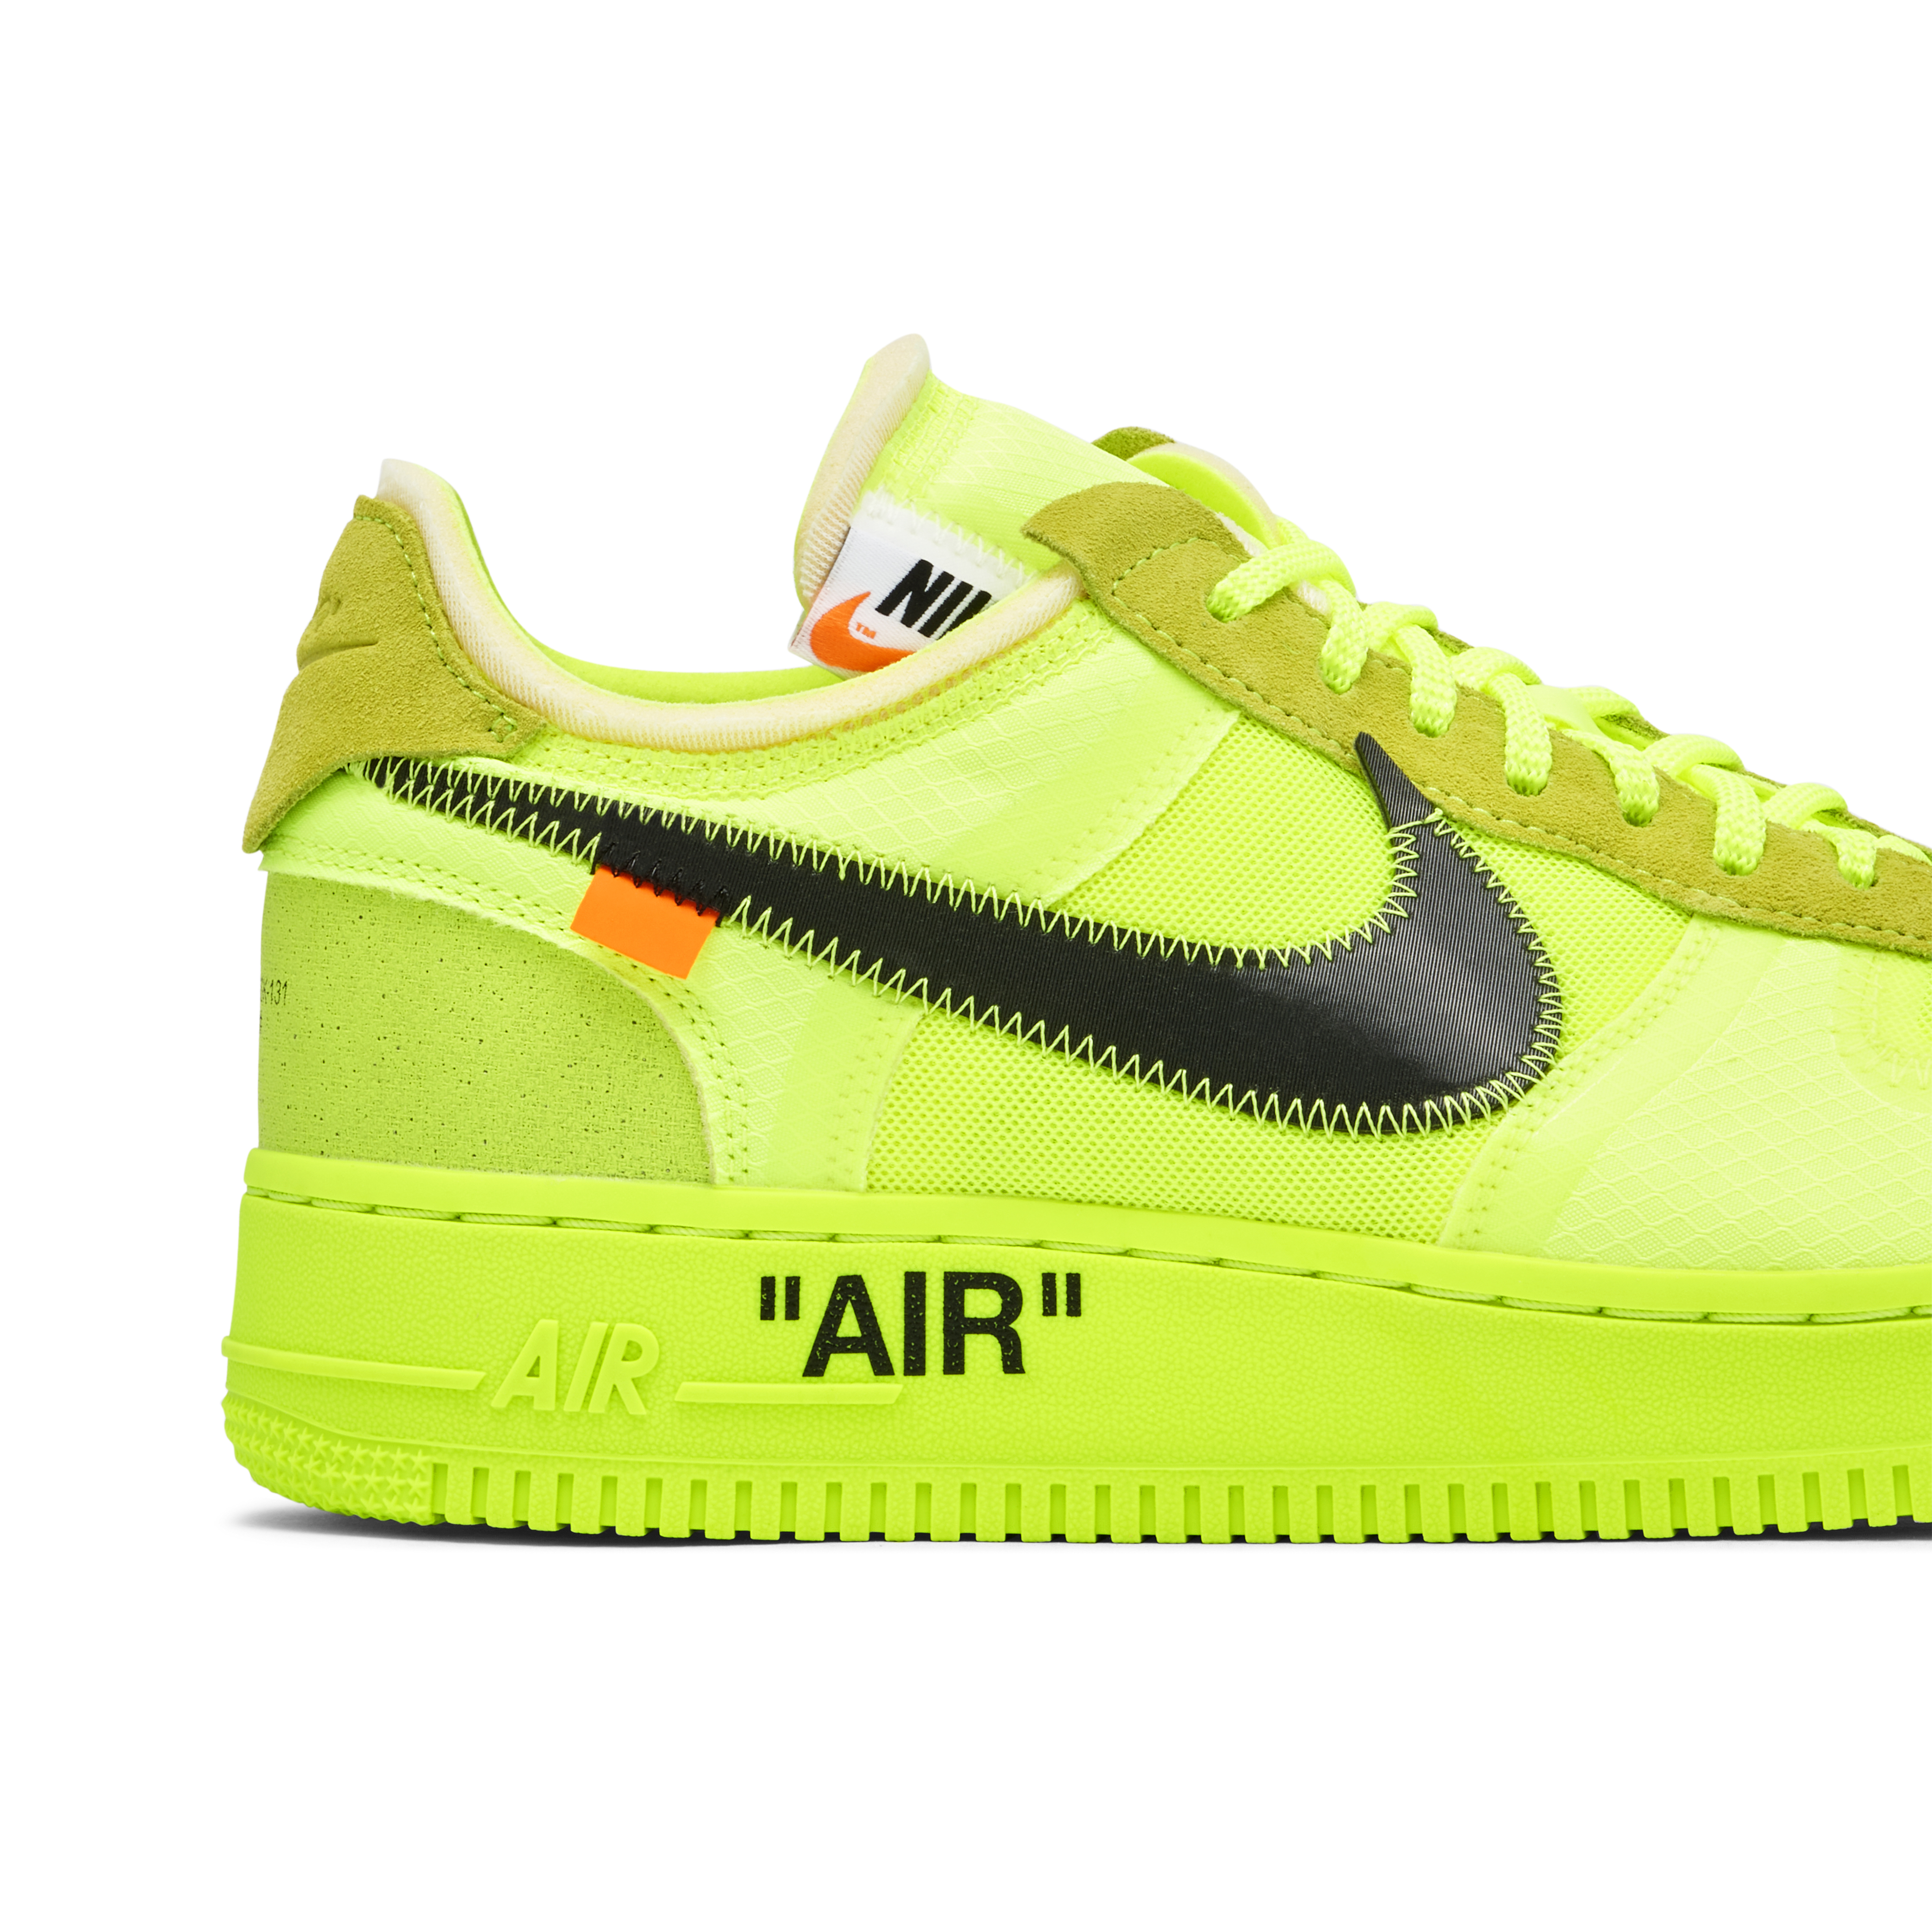 Top Version—Nike x Off-White Air Force 1 “THE TEN”